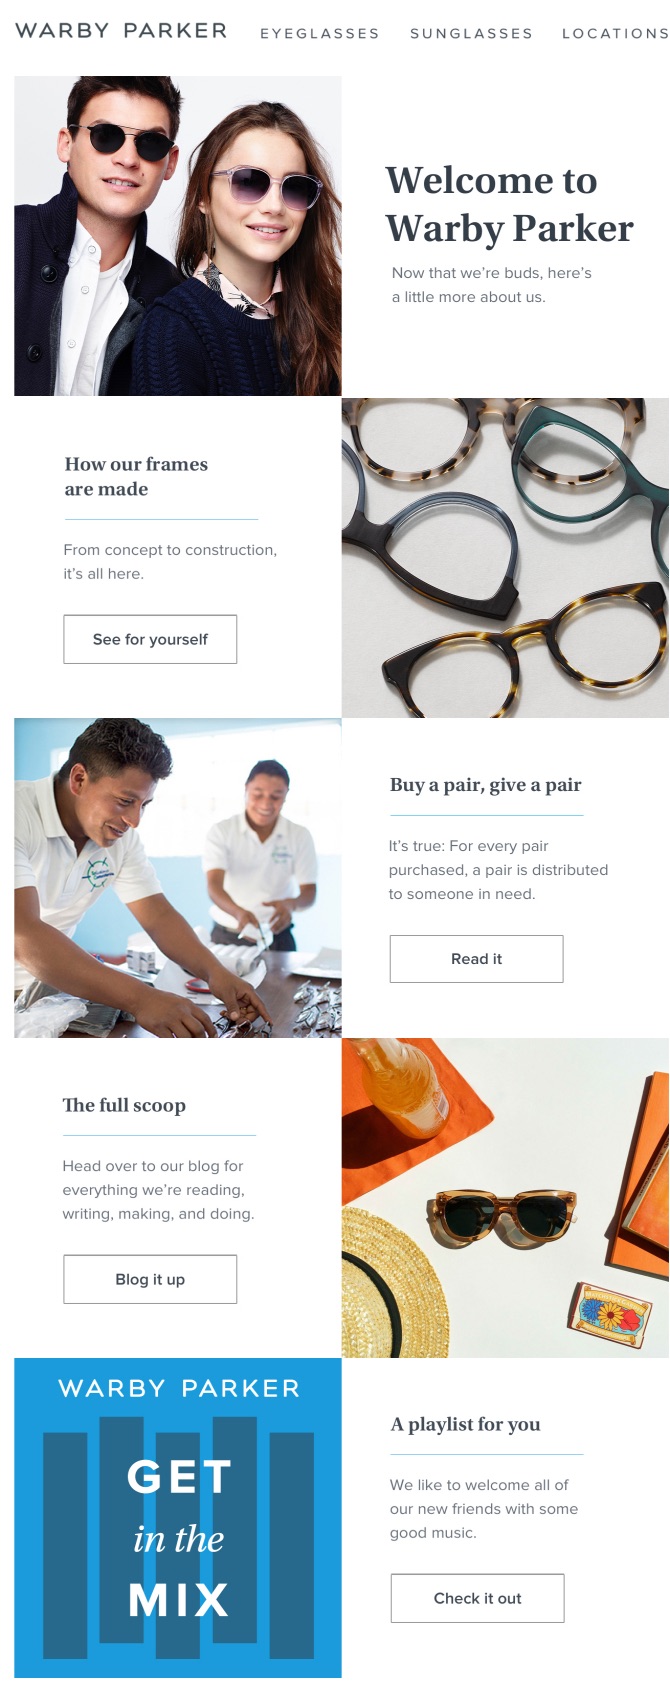 This welcome email introduces Warby Parker's newest subscribers to their brand and shares the company's value.